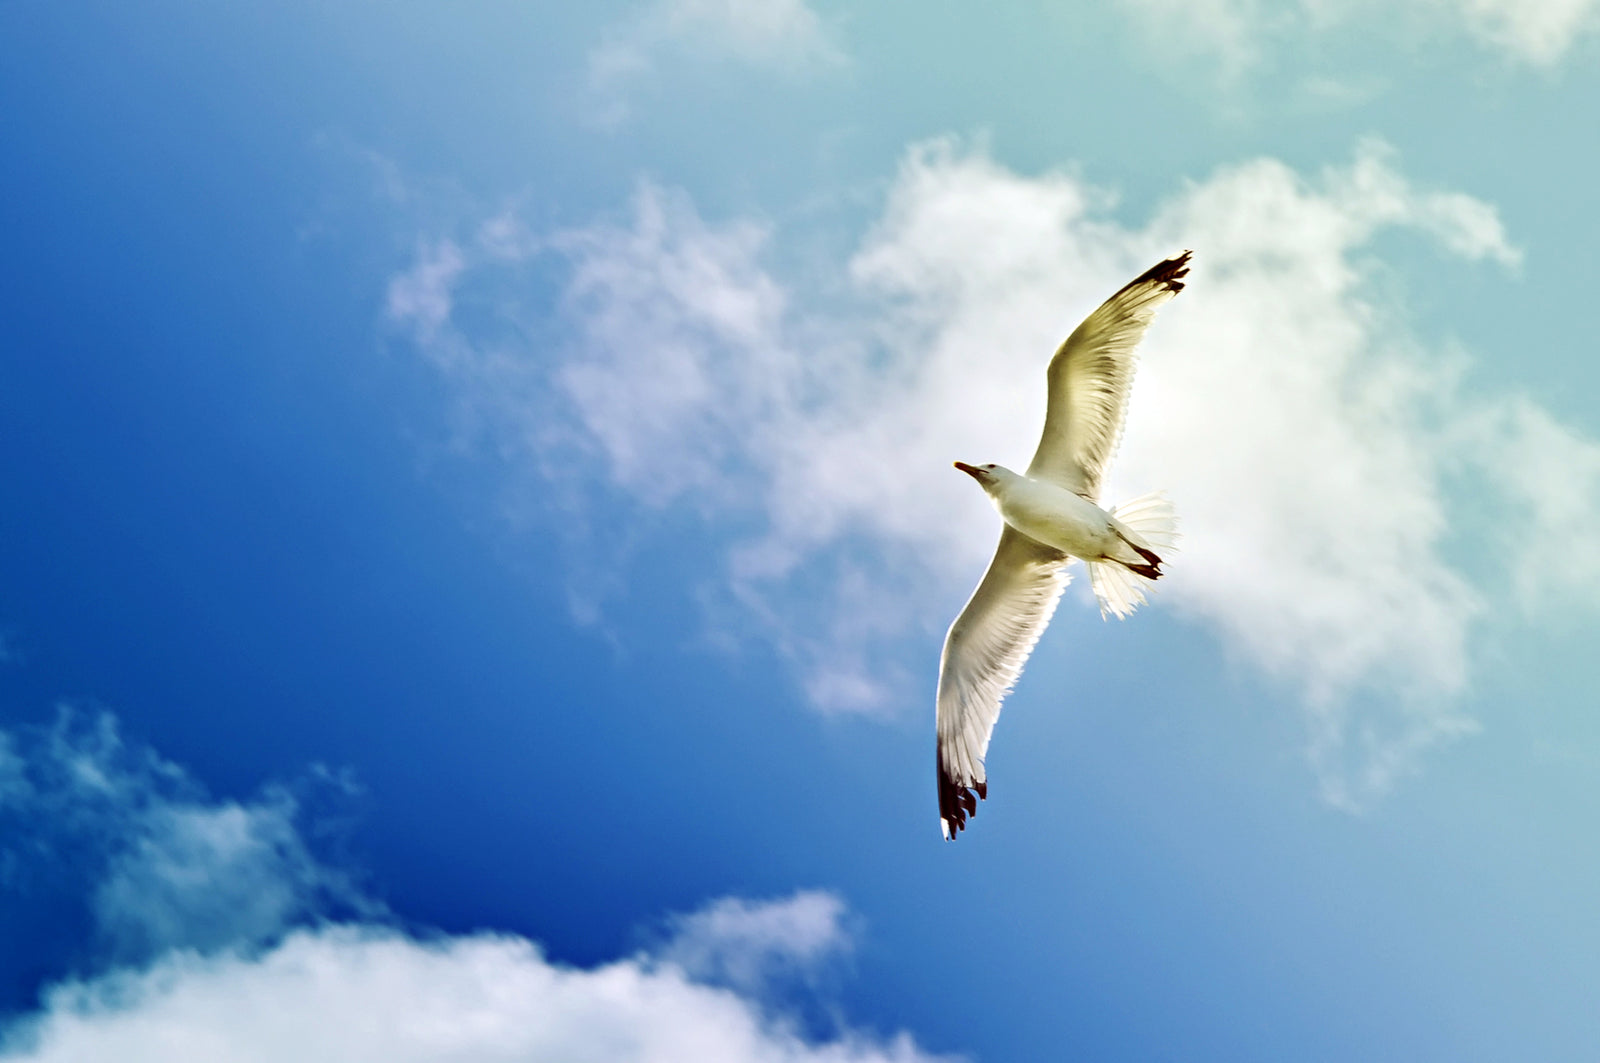 The Parable of the Seagull